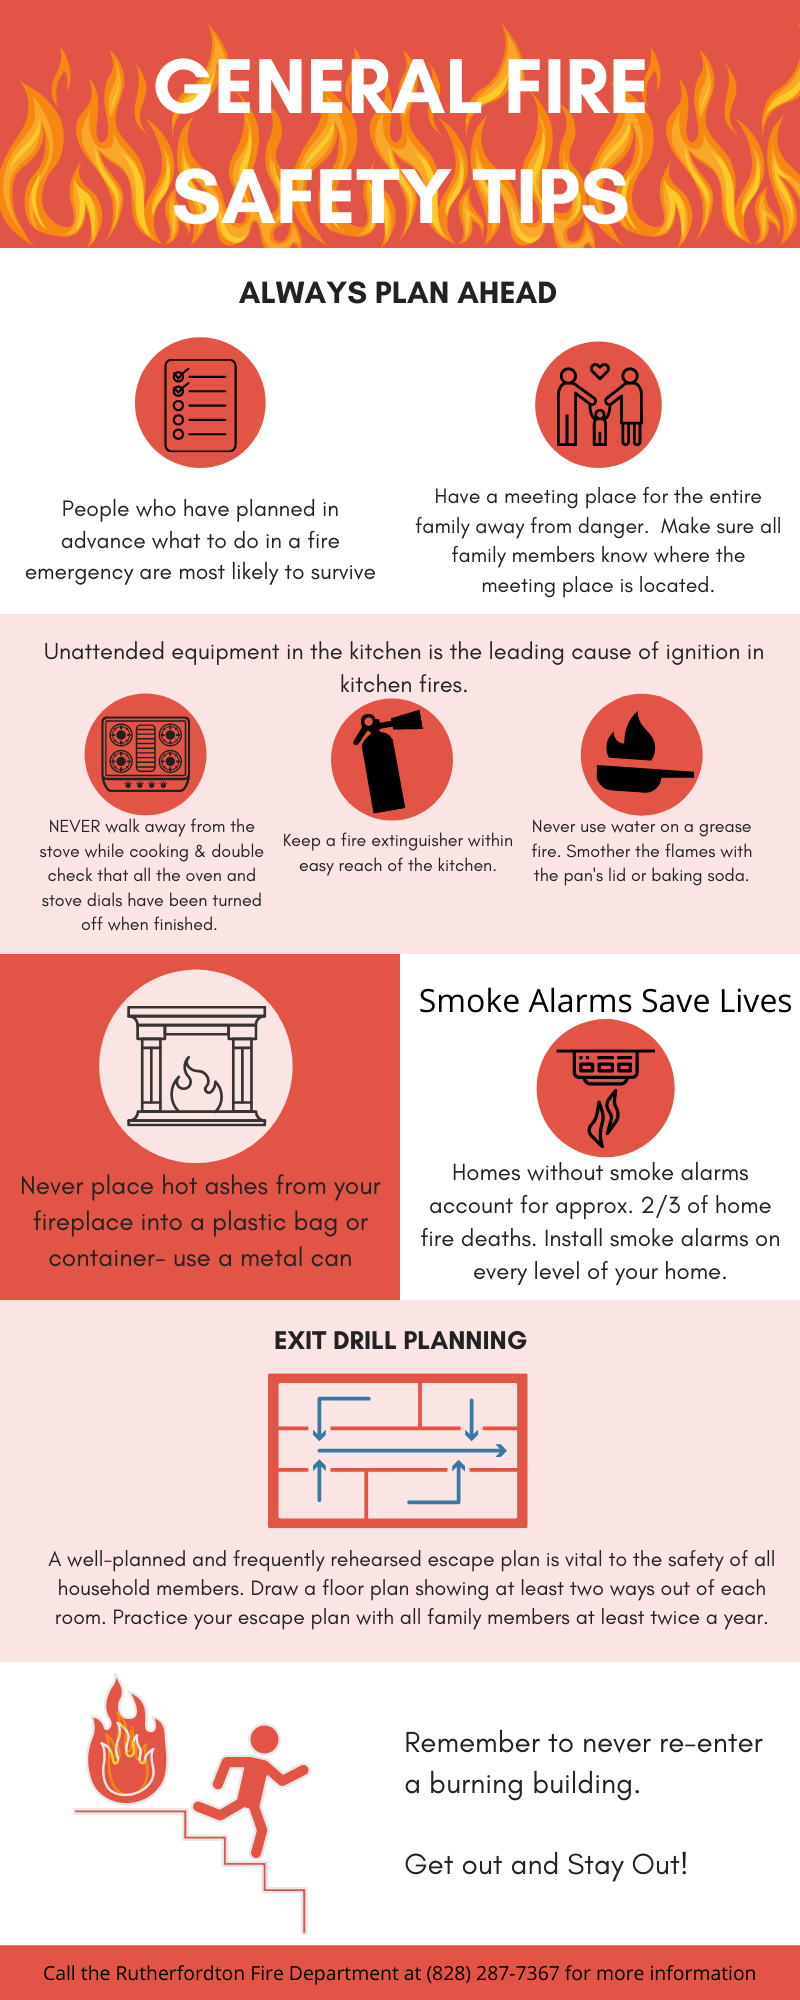 fire prevention pictures